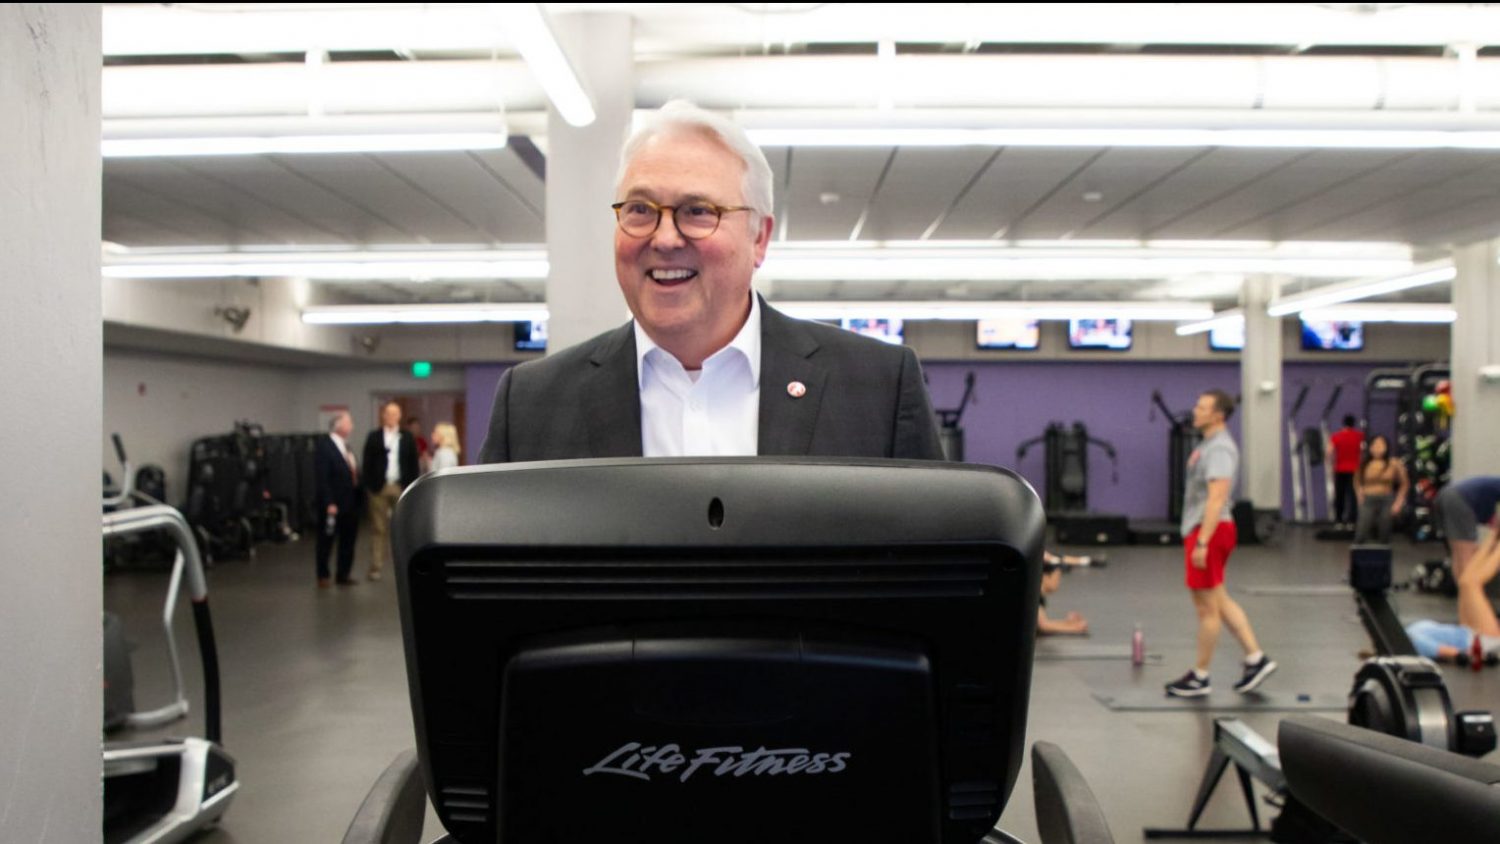 Chancellor Woodson smiling on a treadmill